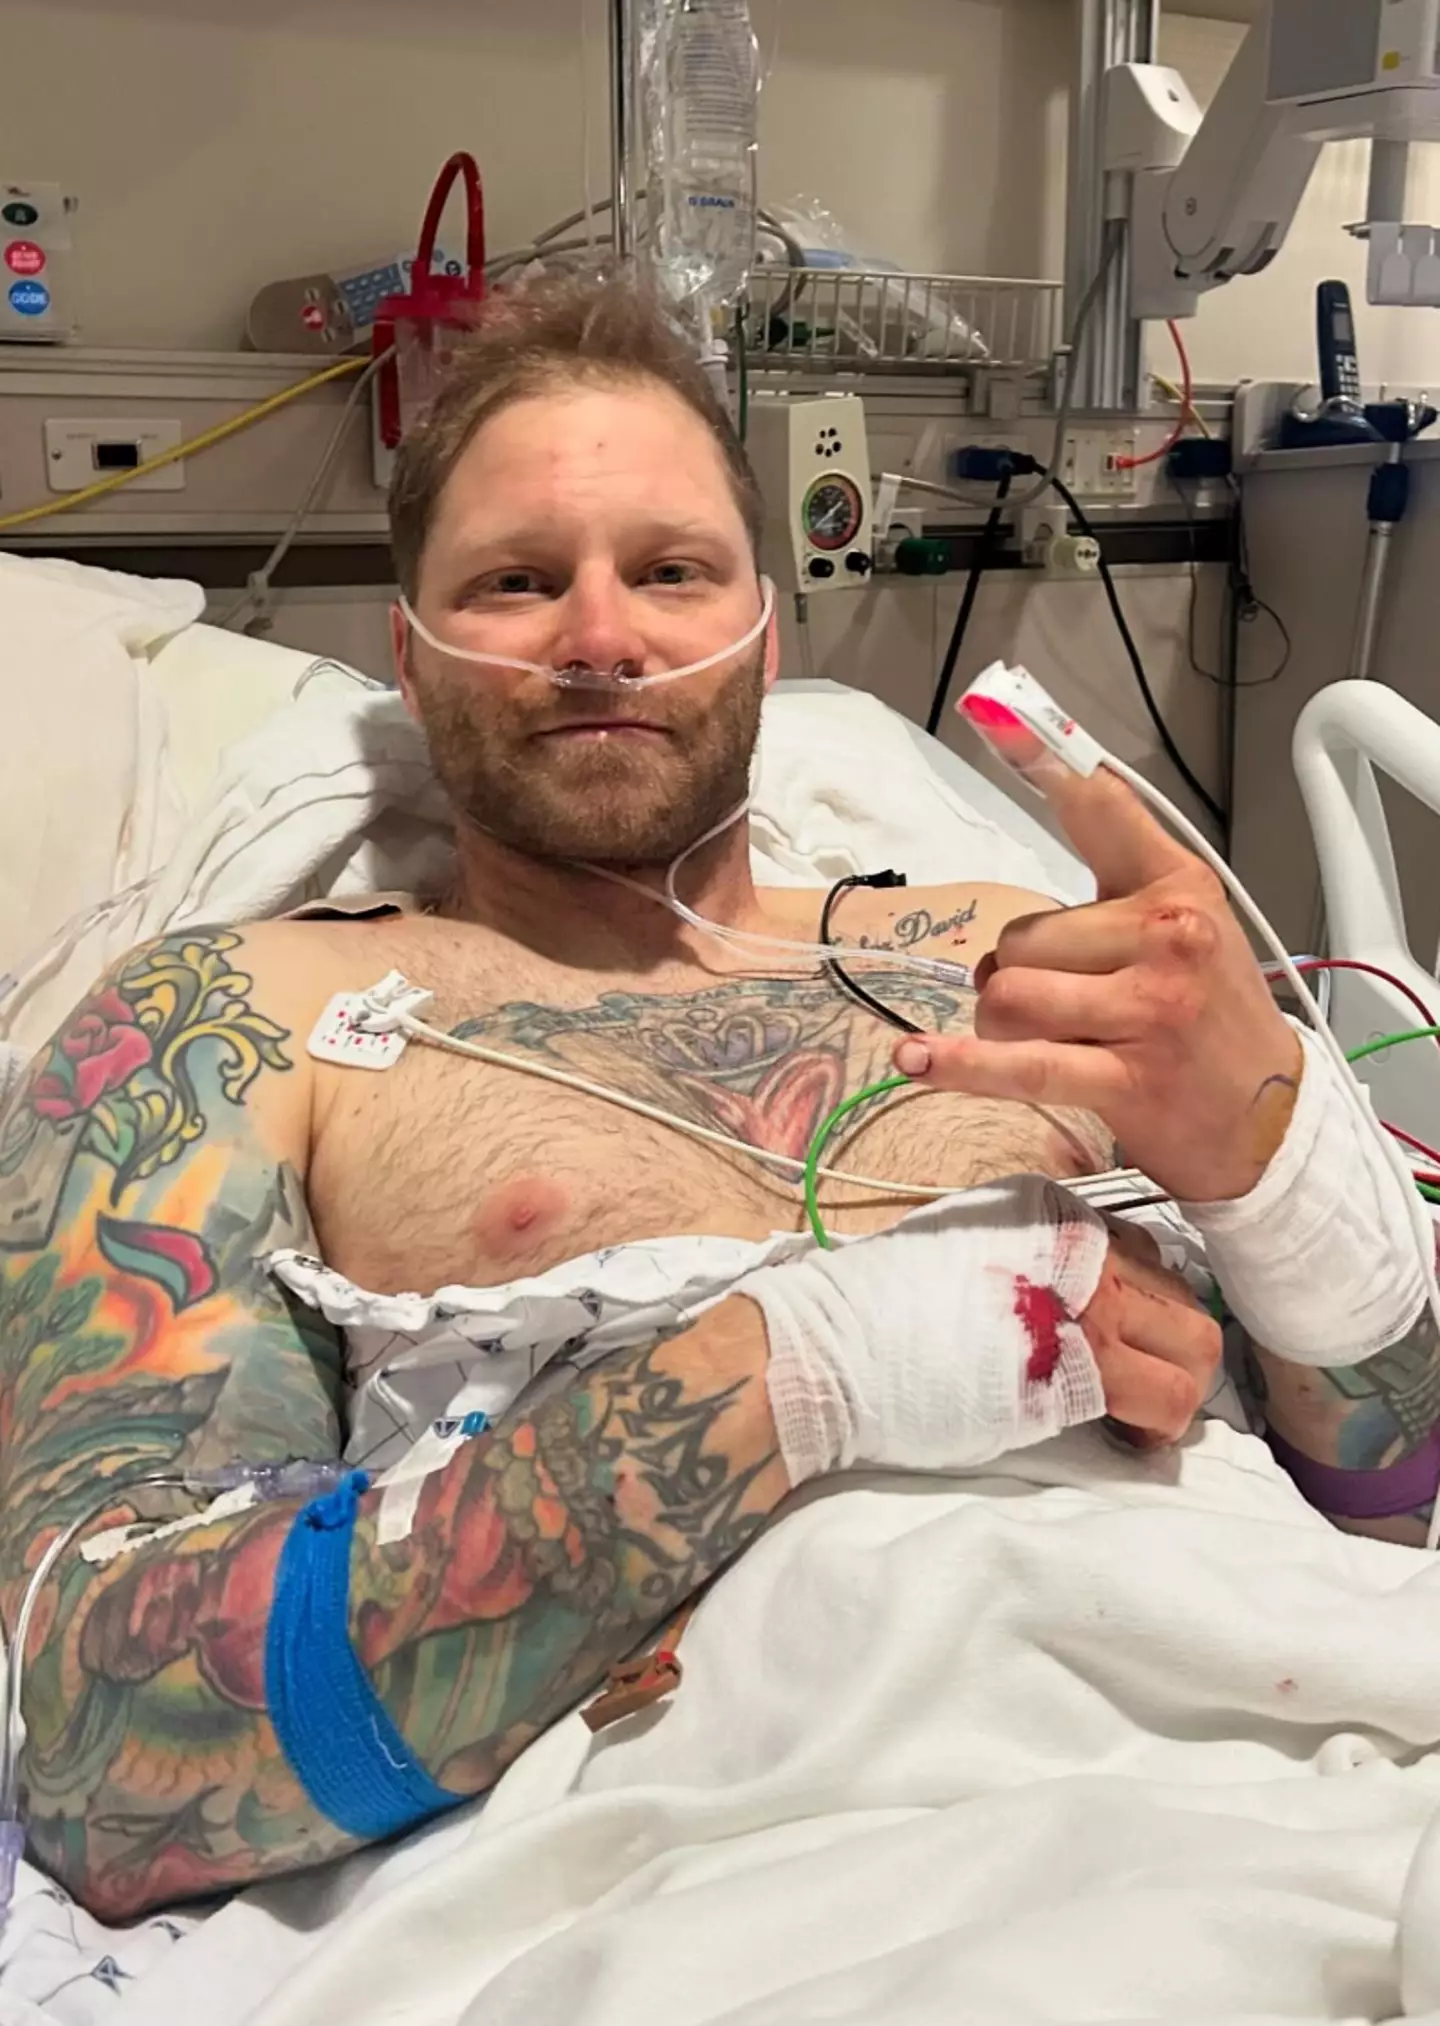 Shayne Patrick Burke, 35, survived an encounter with a female grizzly bear. (Instagram/@n0beefstew4u)